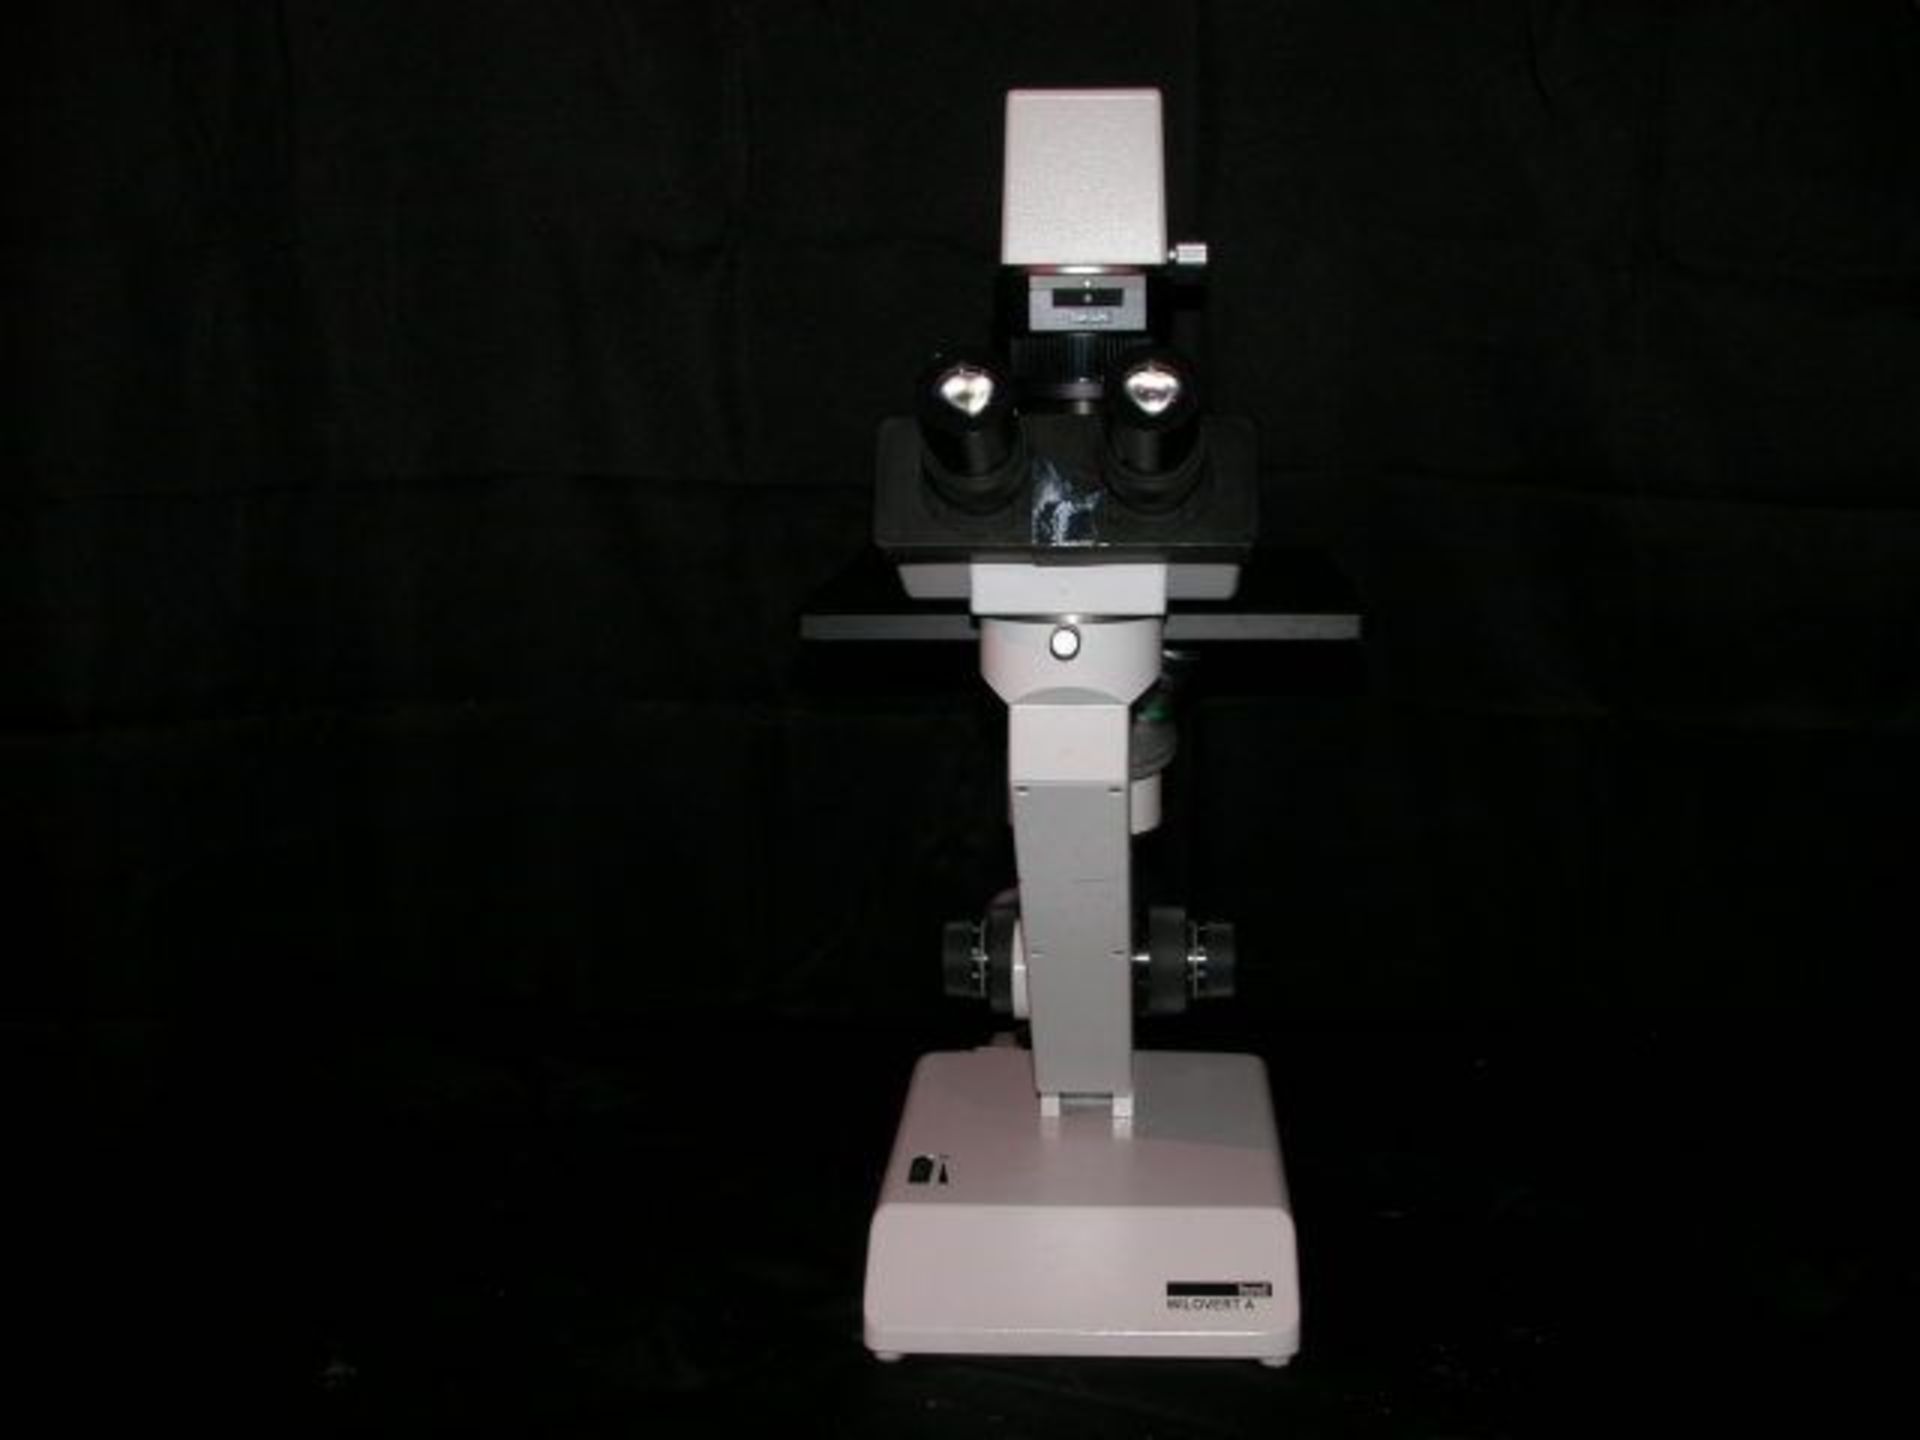 Hund Wetzlar Wilovert A Inverted Microscope 2 Ocular 3 Objectives, Qty 1, 330800442517 - Image 2 of 16